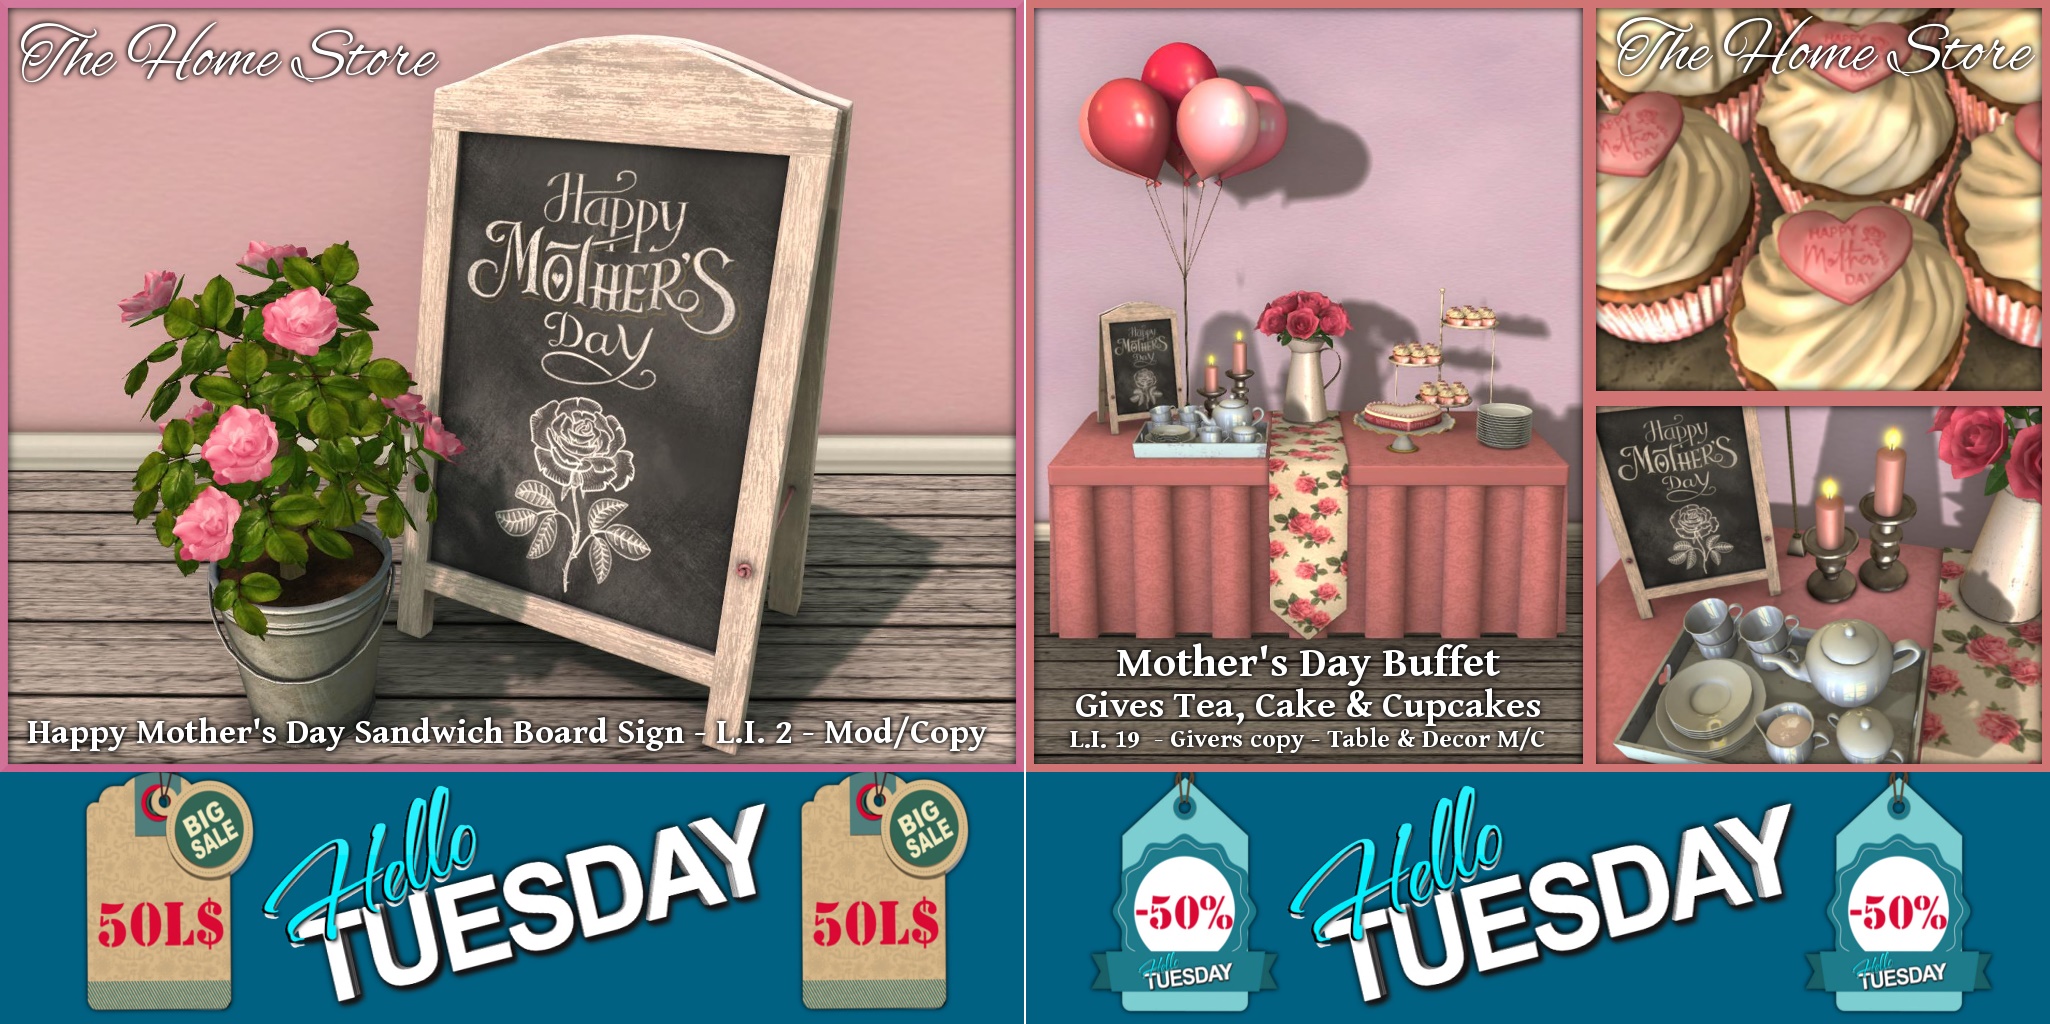 The Home Store – Happy Mother’s Day Sandwich Board & Mother’s Day Buffet